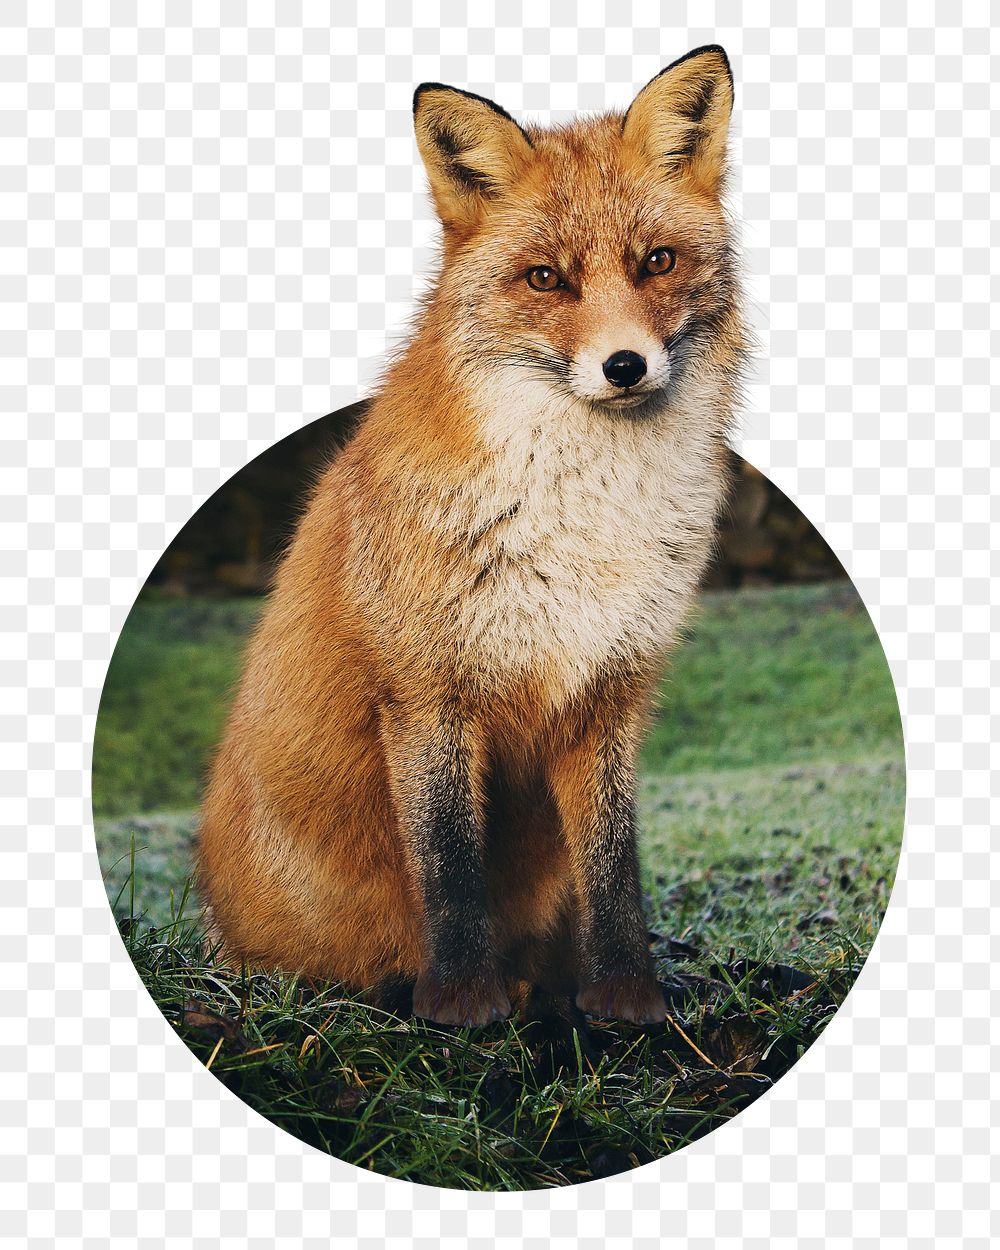 Red fox png badge sticker, animal in circle shape photo, transparent background